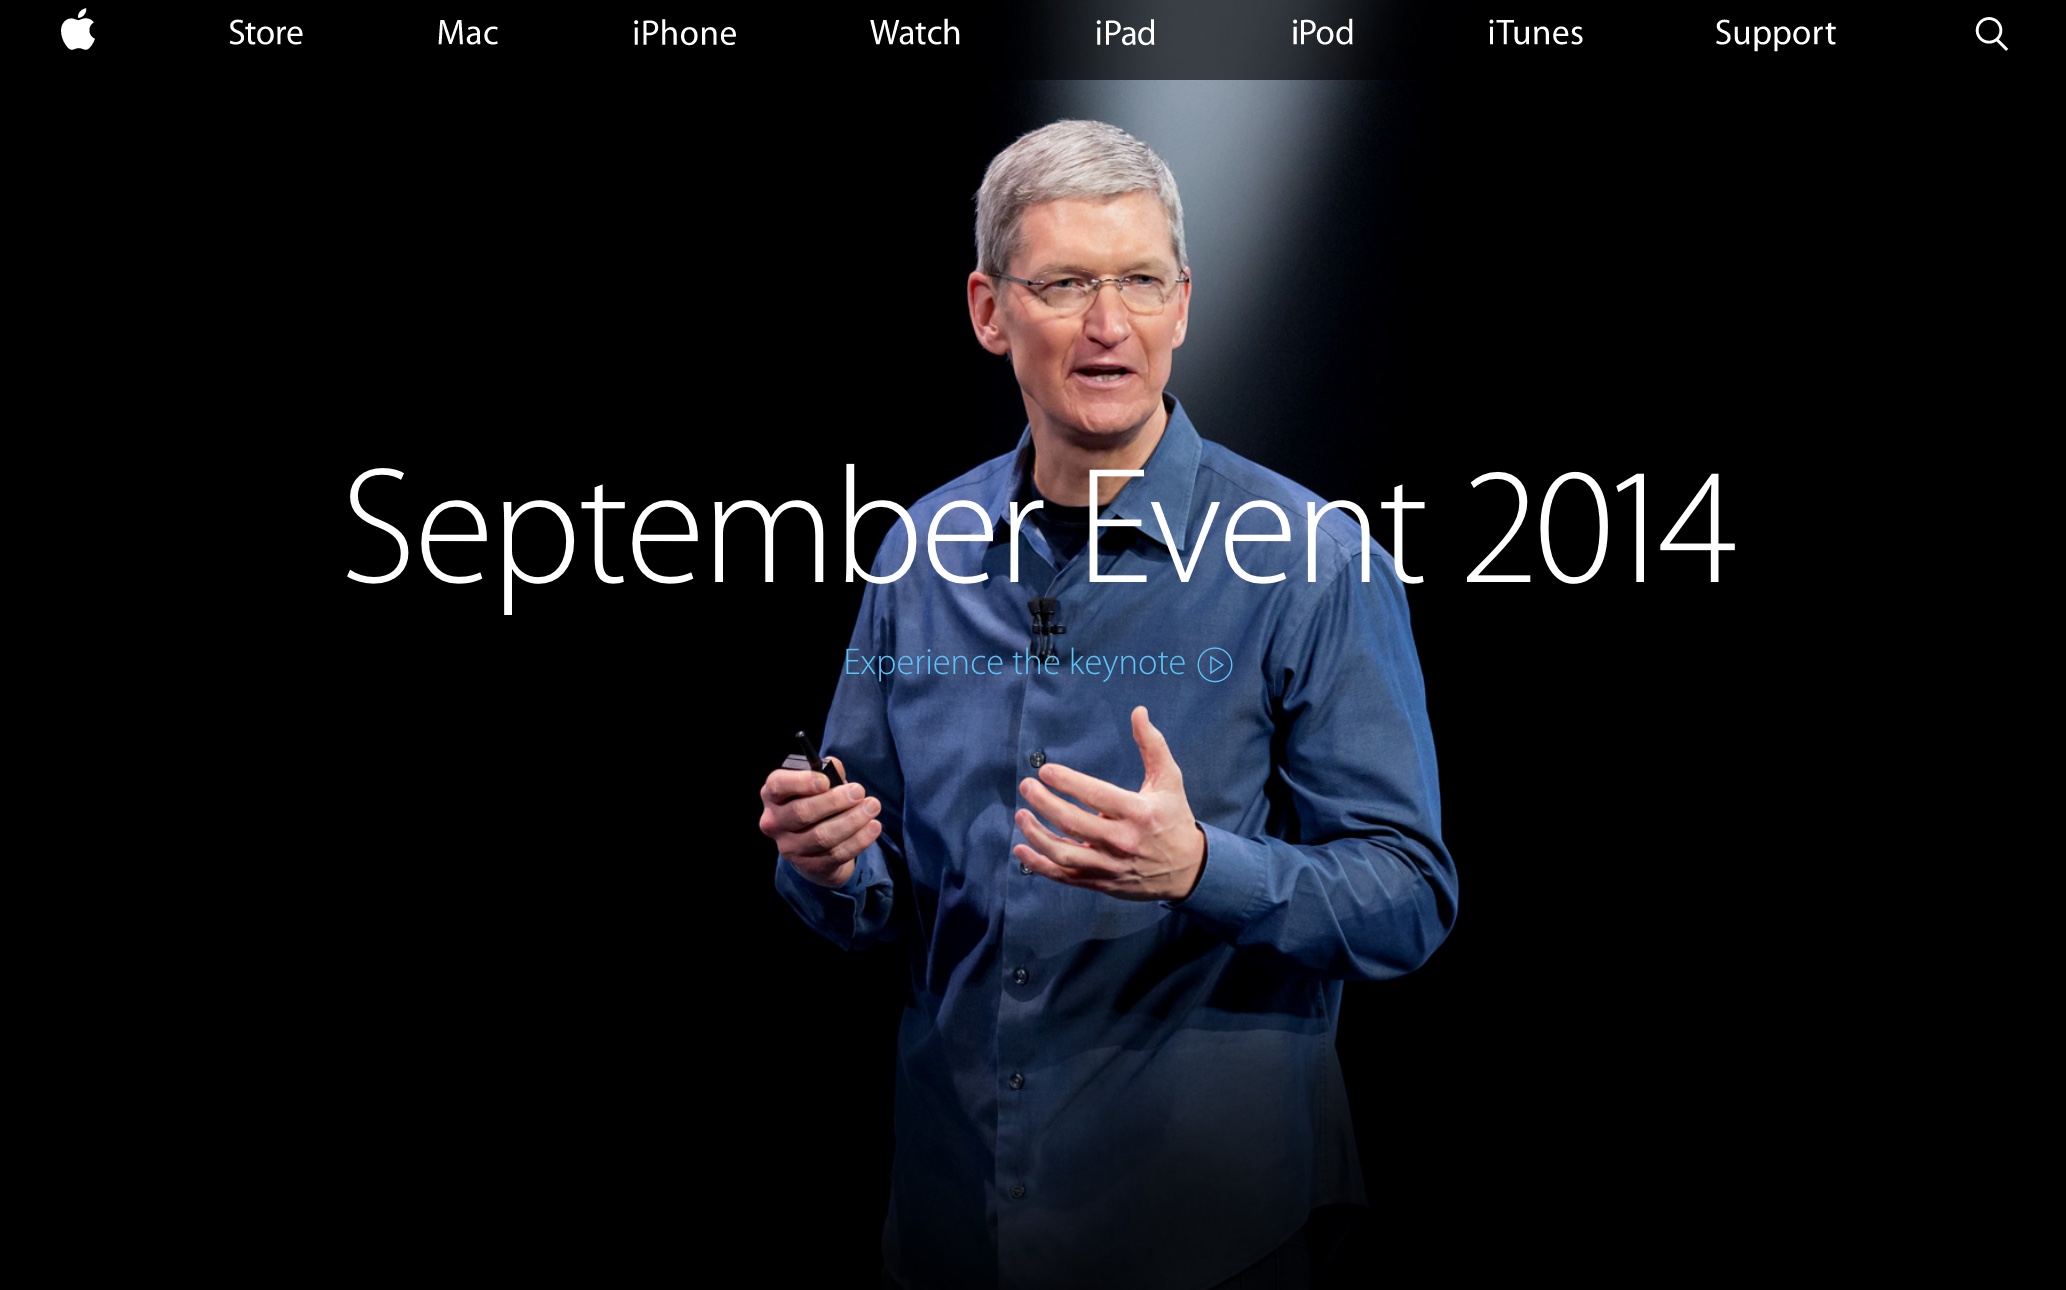 Homepage with Apple CEO Tim Cook (2014)